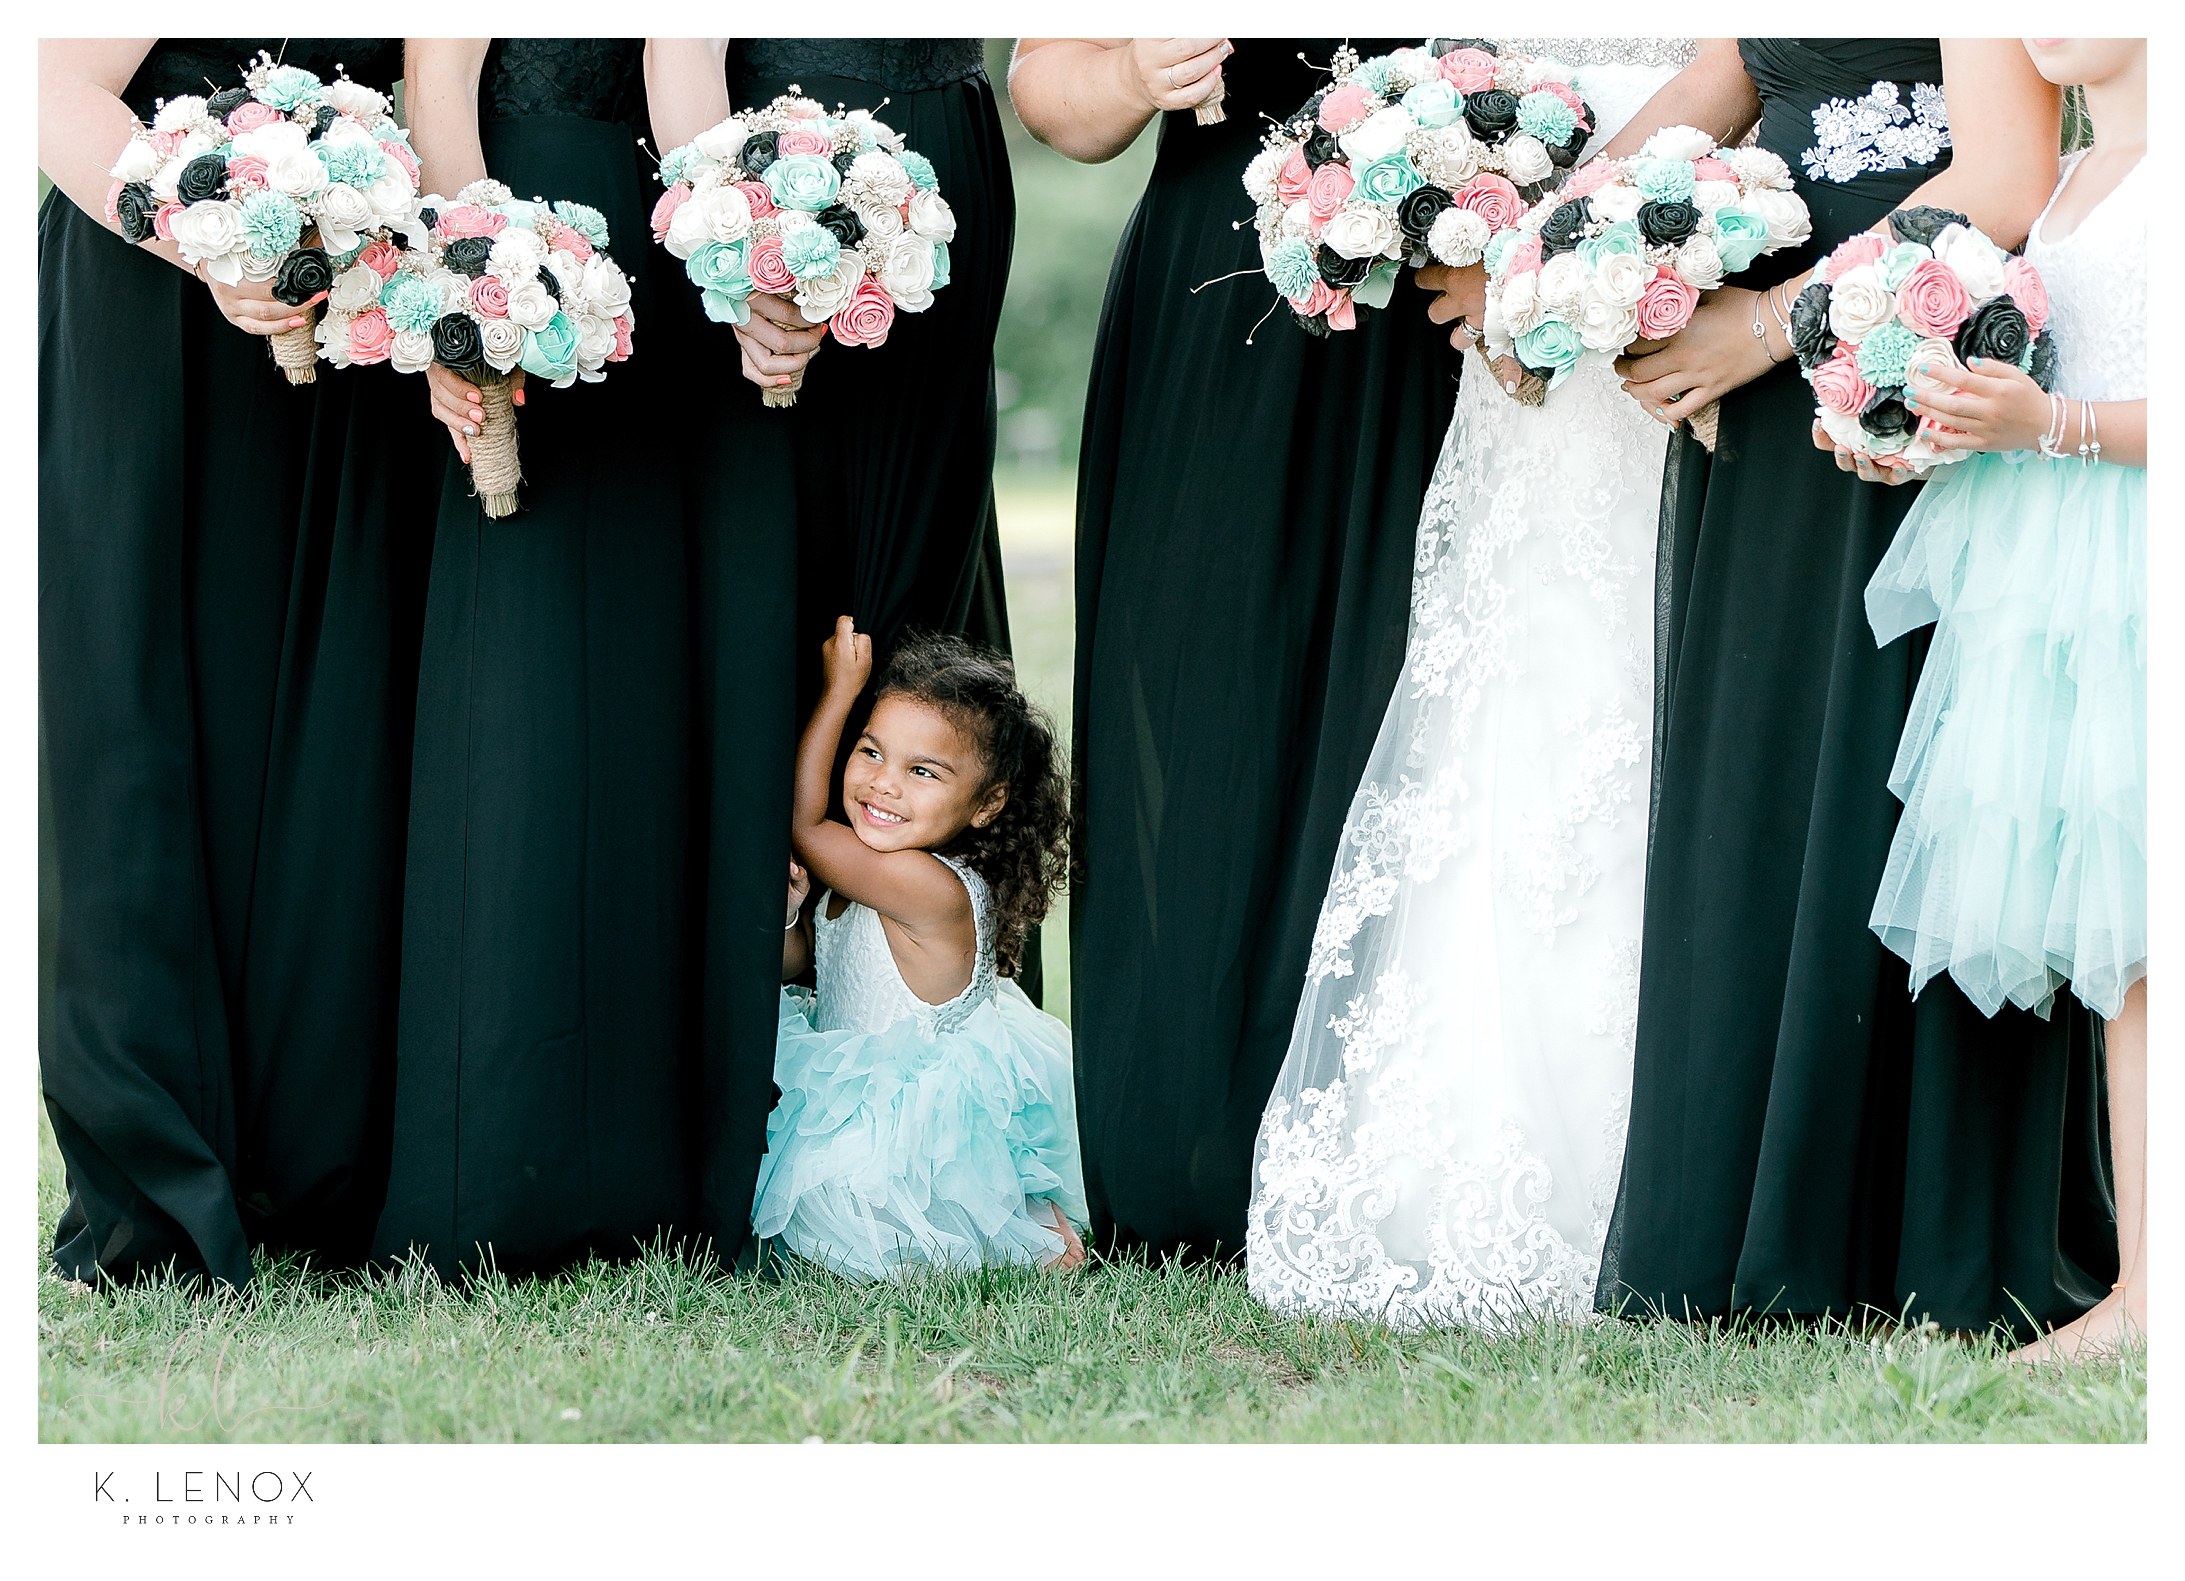 Cute little flower girl wearing a teal and white dress next to the bridesmaids wearing black. 